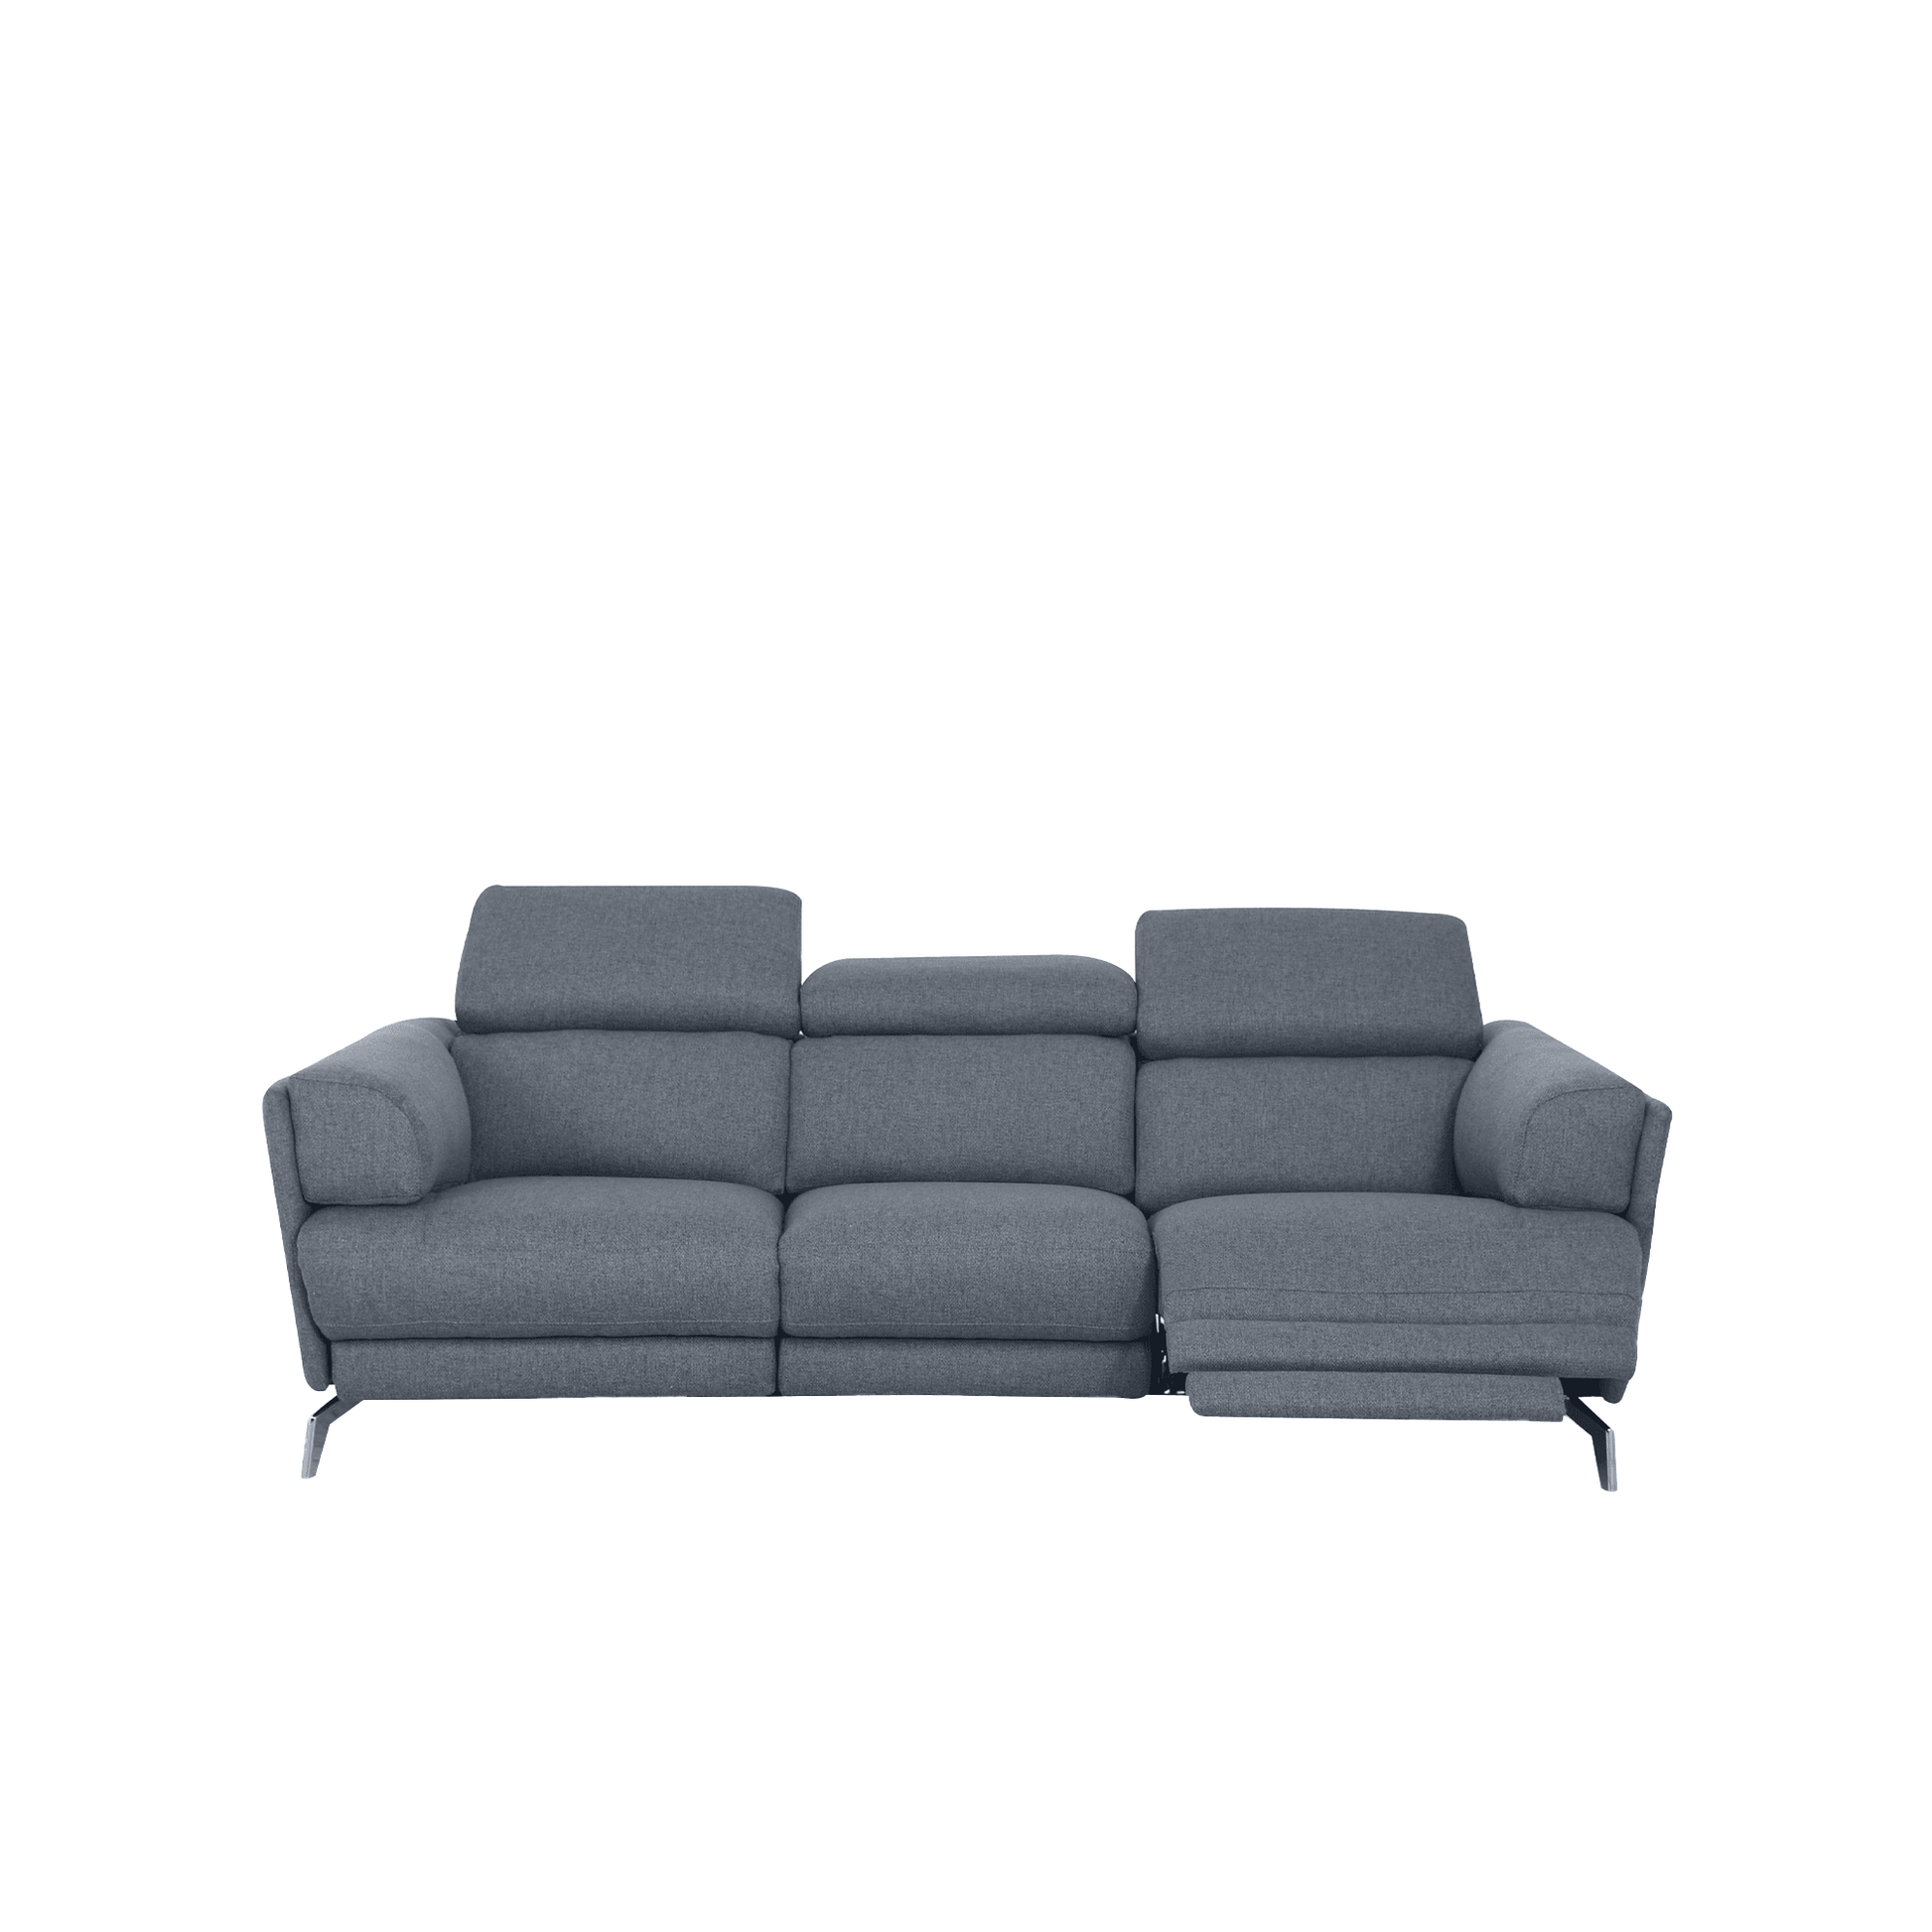 Blush 3 seater sofa with 2 recliners in Grey Lagoon Fabric, 221cm - HomesToLife